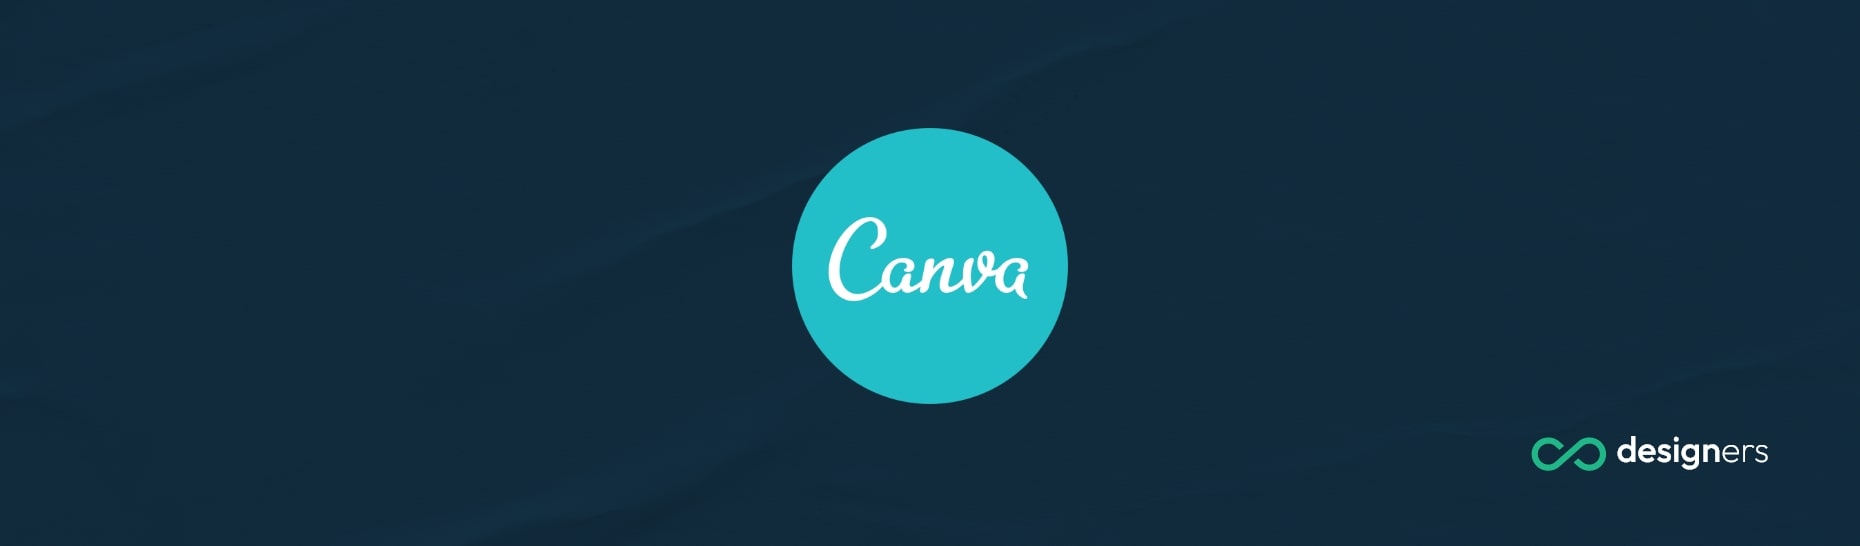 Is Canva Stock Free?